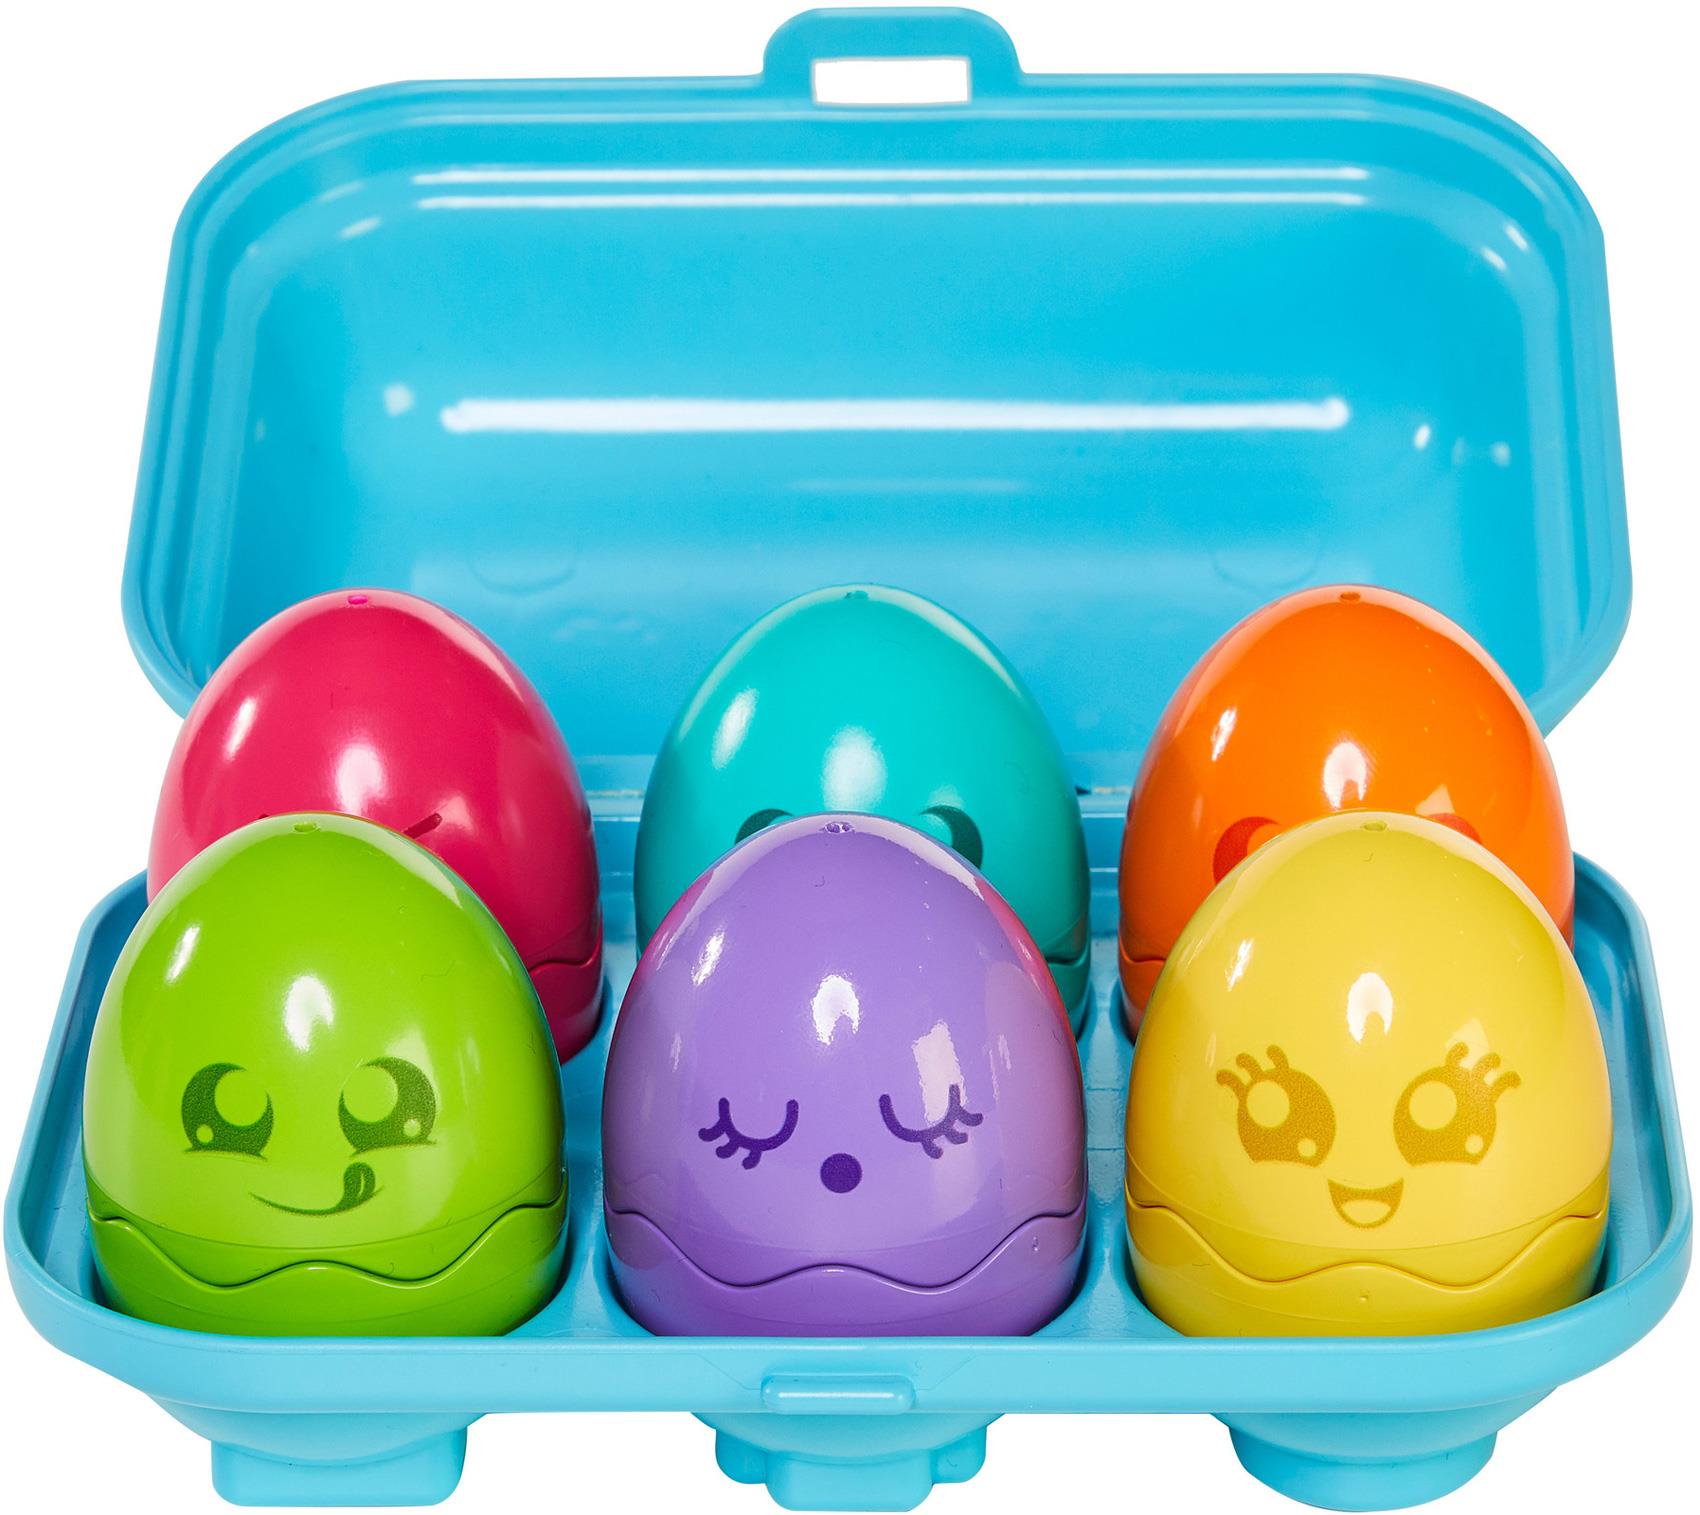 Tomy Toomies Hide And Squeak Bright Chicks